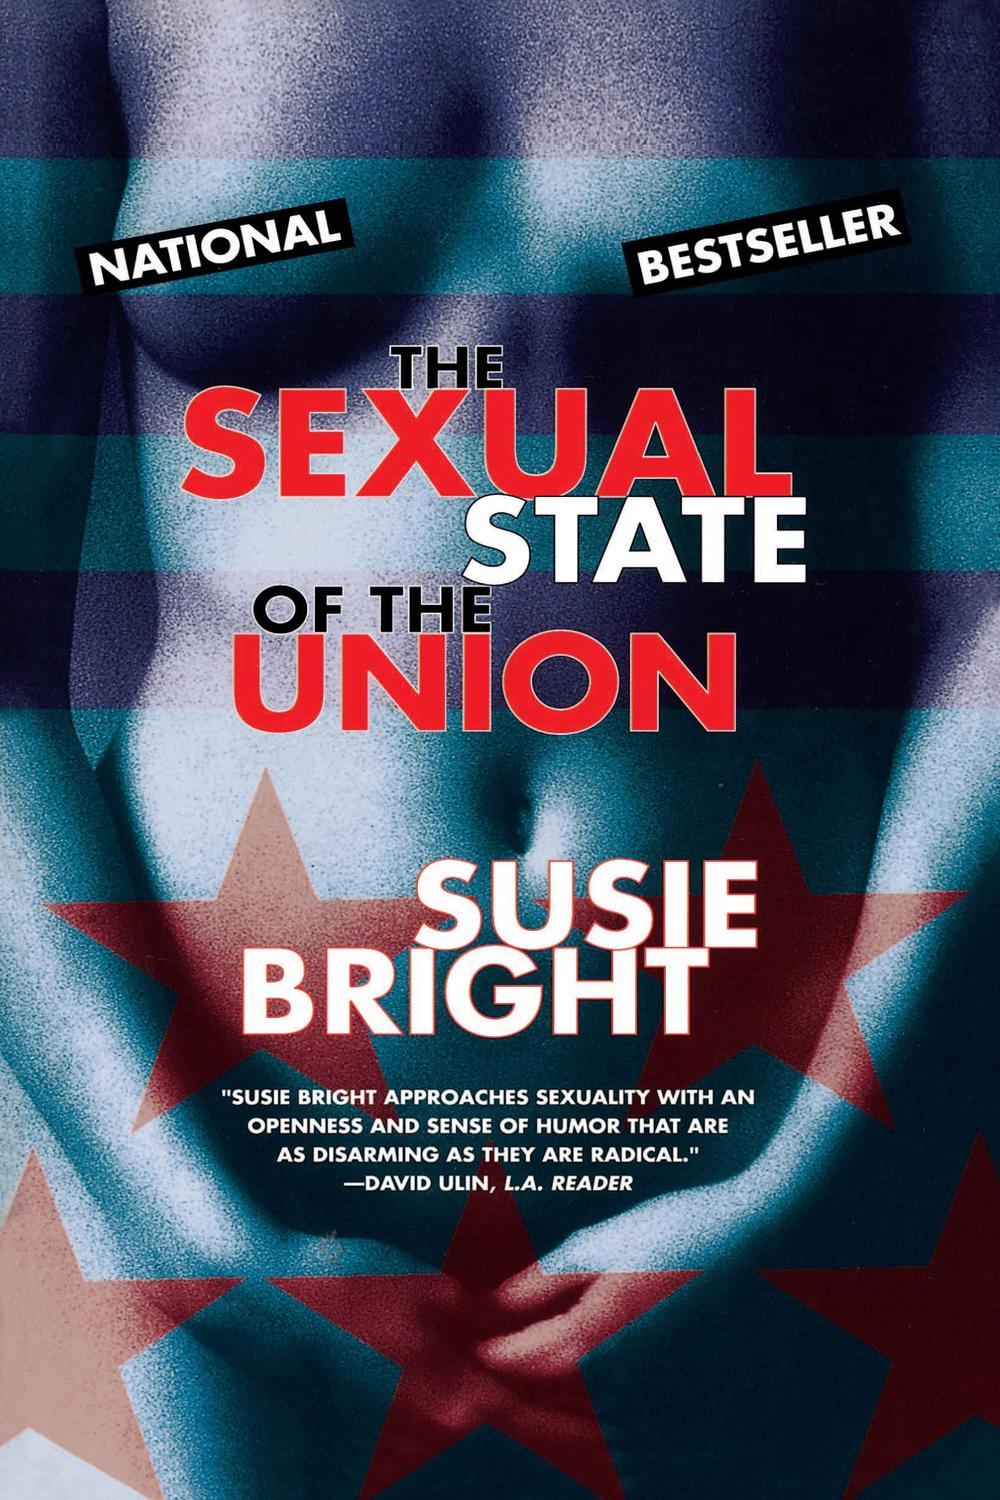 The Sexual State of the Union - Susie Bright